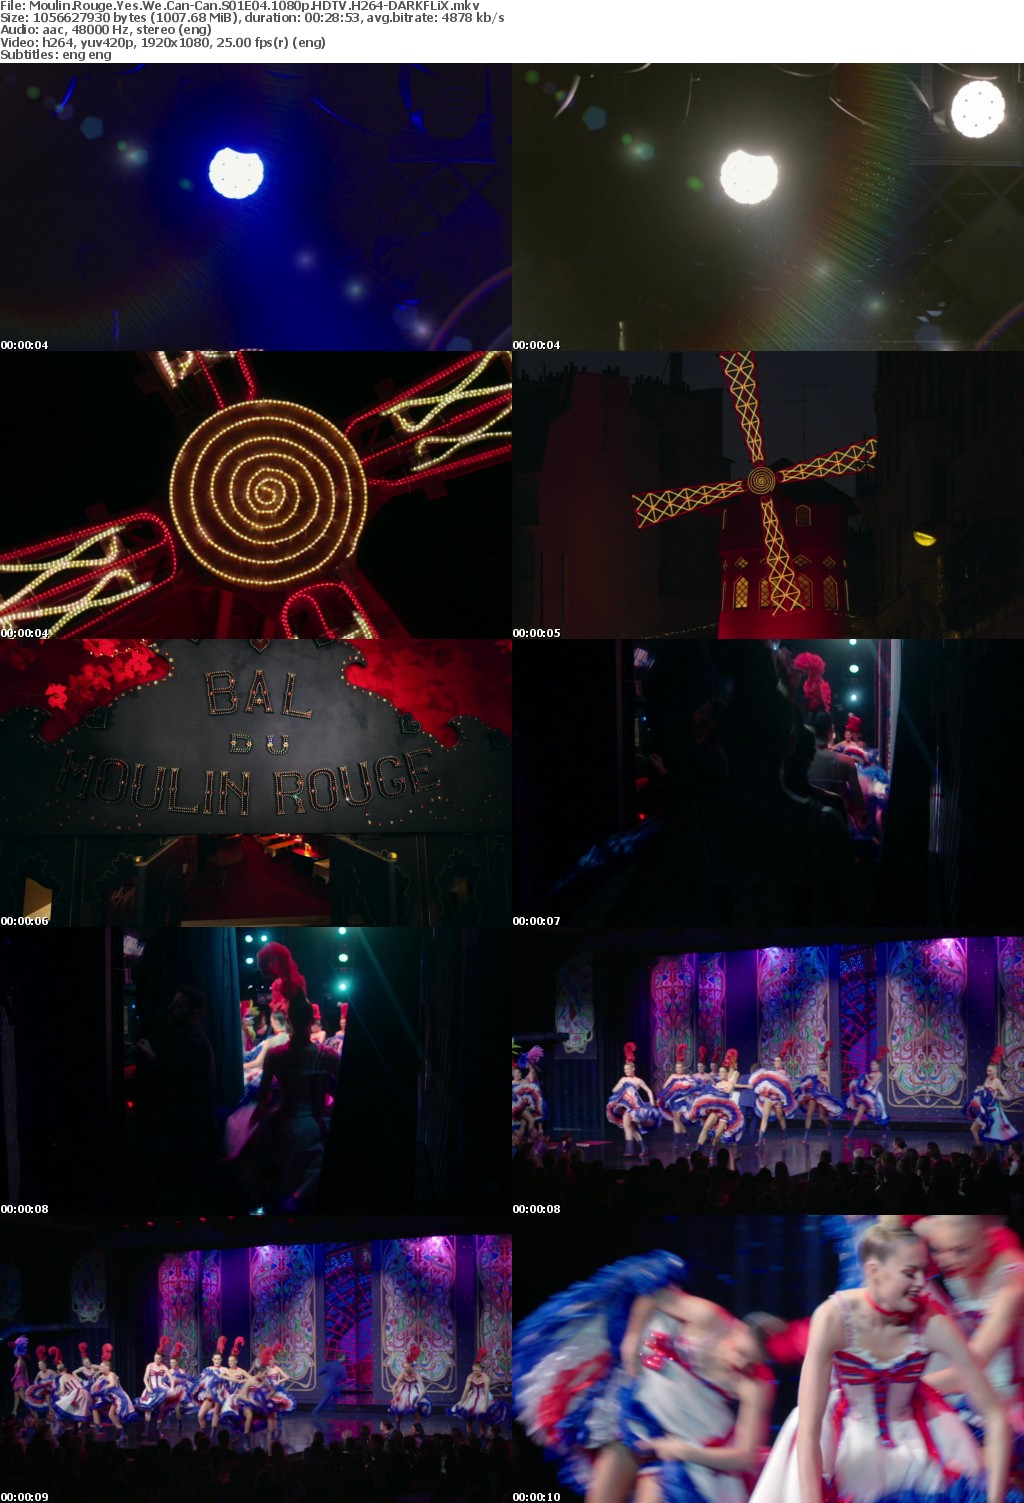 Moulin Rouge Yes We Can-Can S01E04 1080p HDTV H264-DARKFLiX